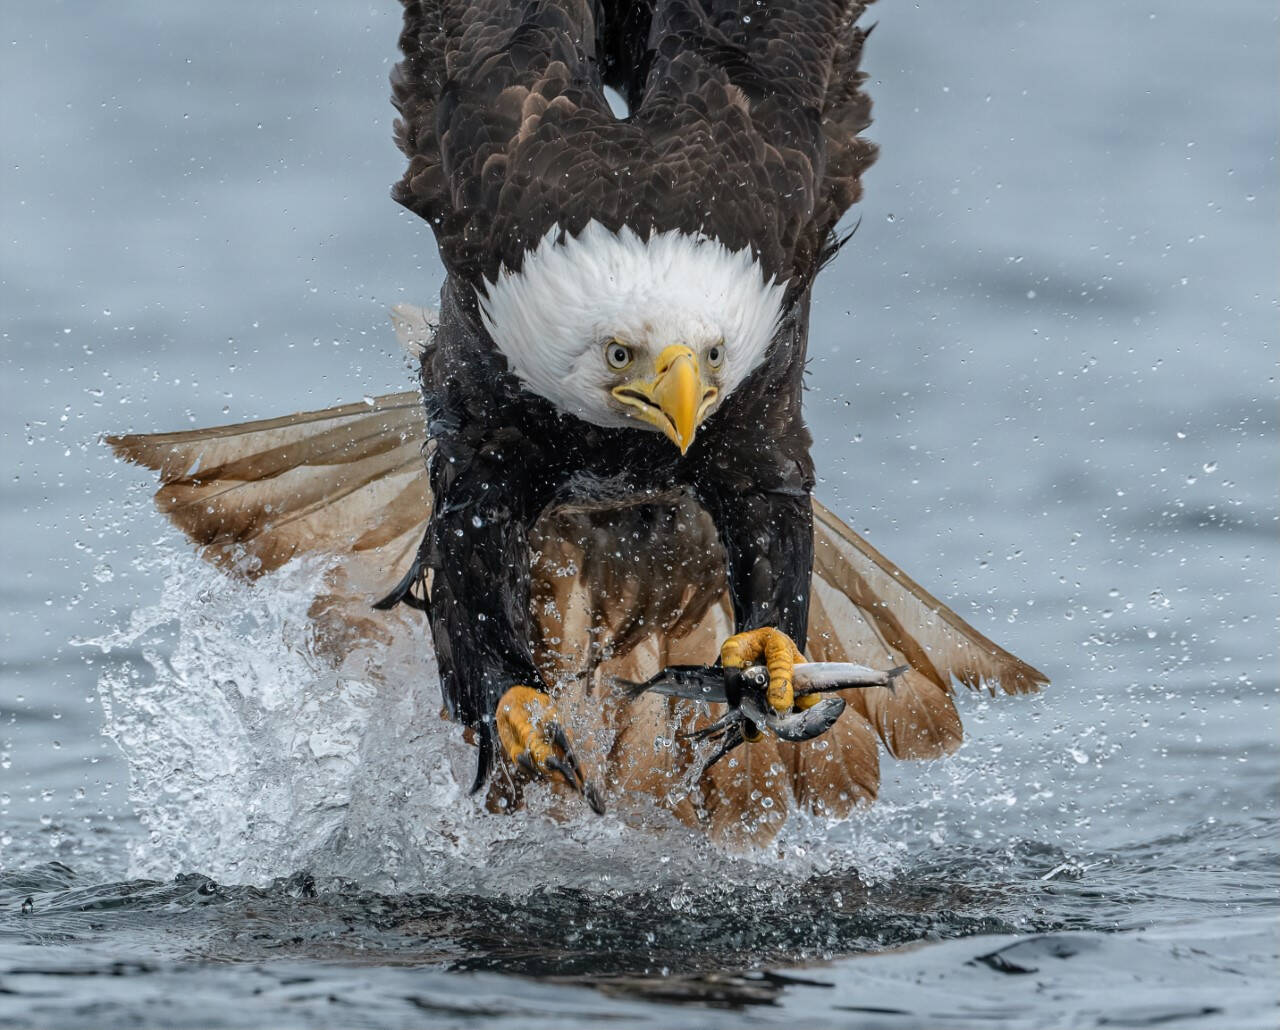 Anthony Bucci photographed a bald eagle in Blackfish Sound last fall as it swooped down on a herring ball. (Anthony Bucci Photography)